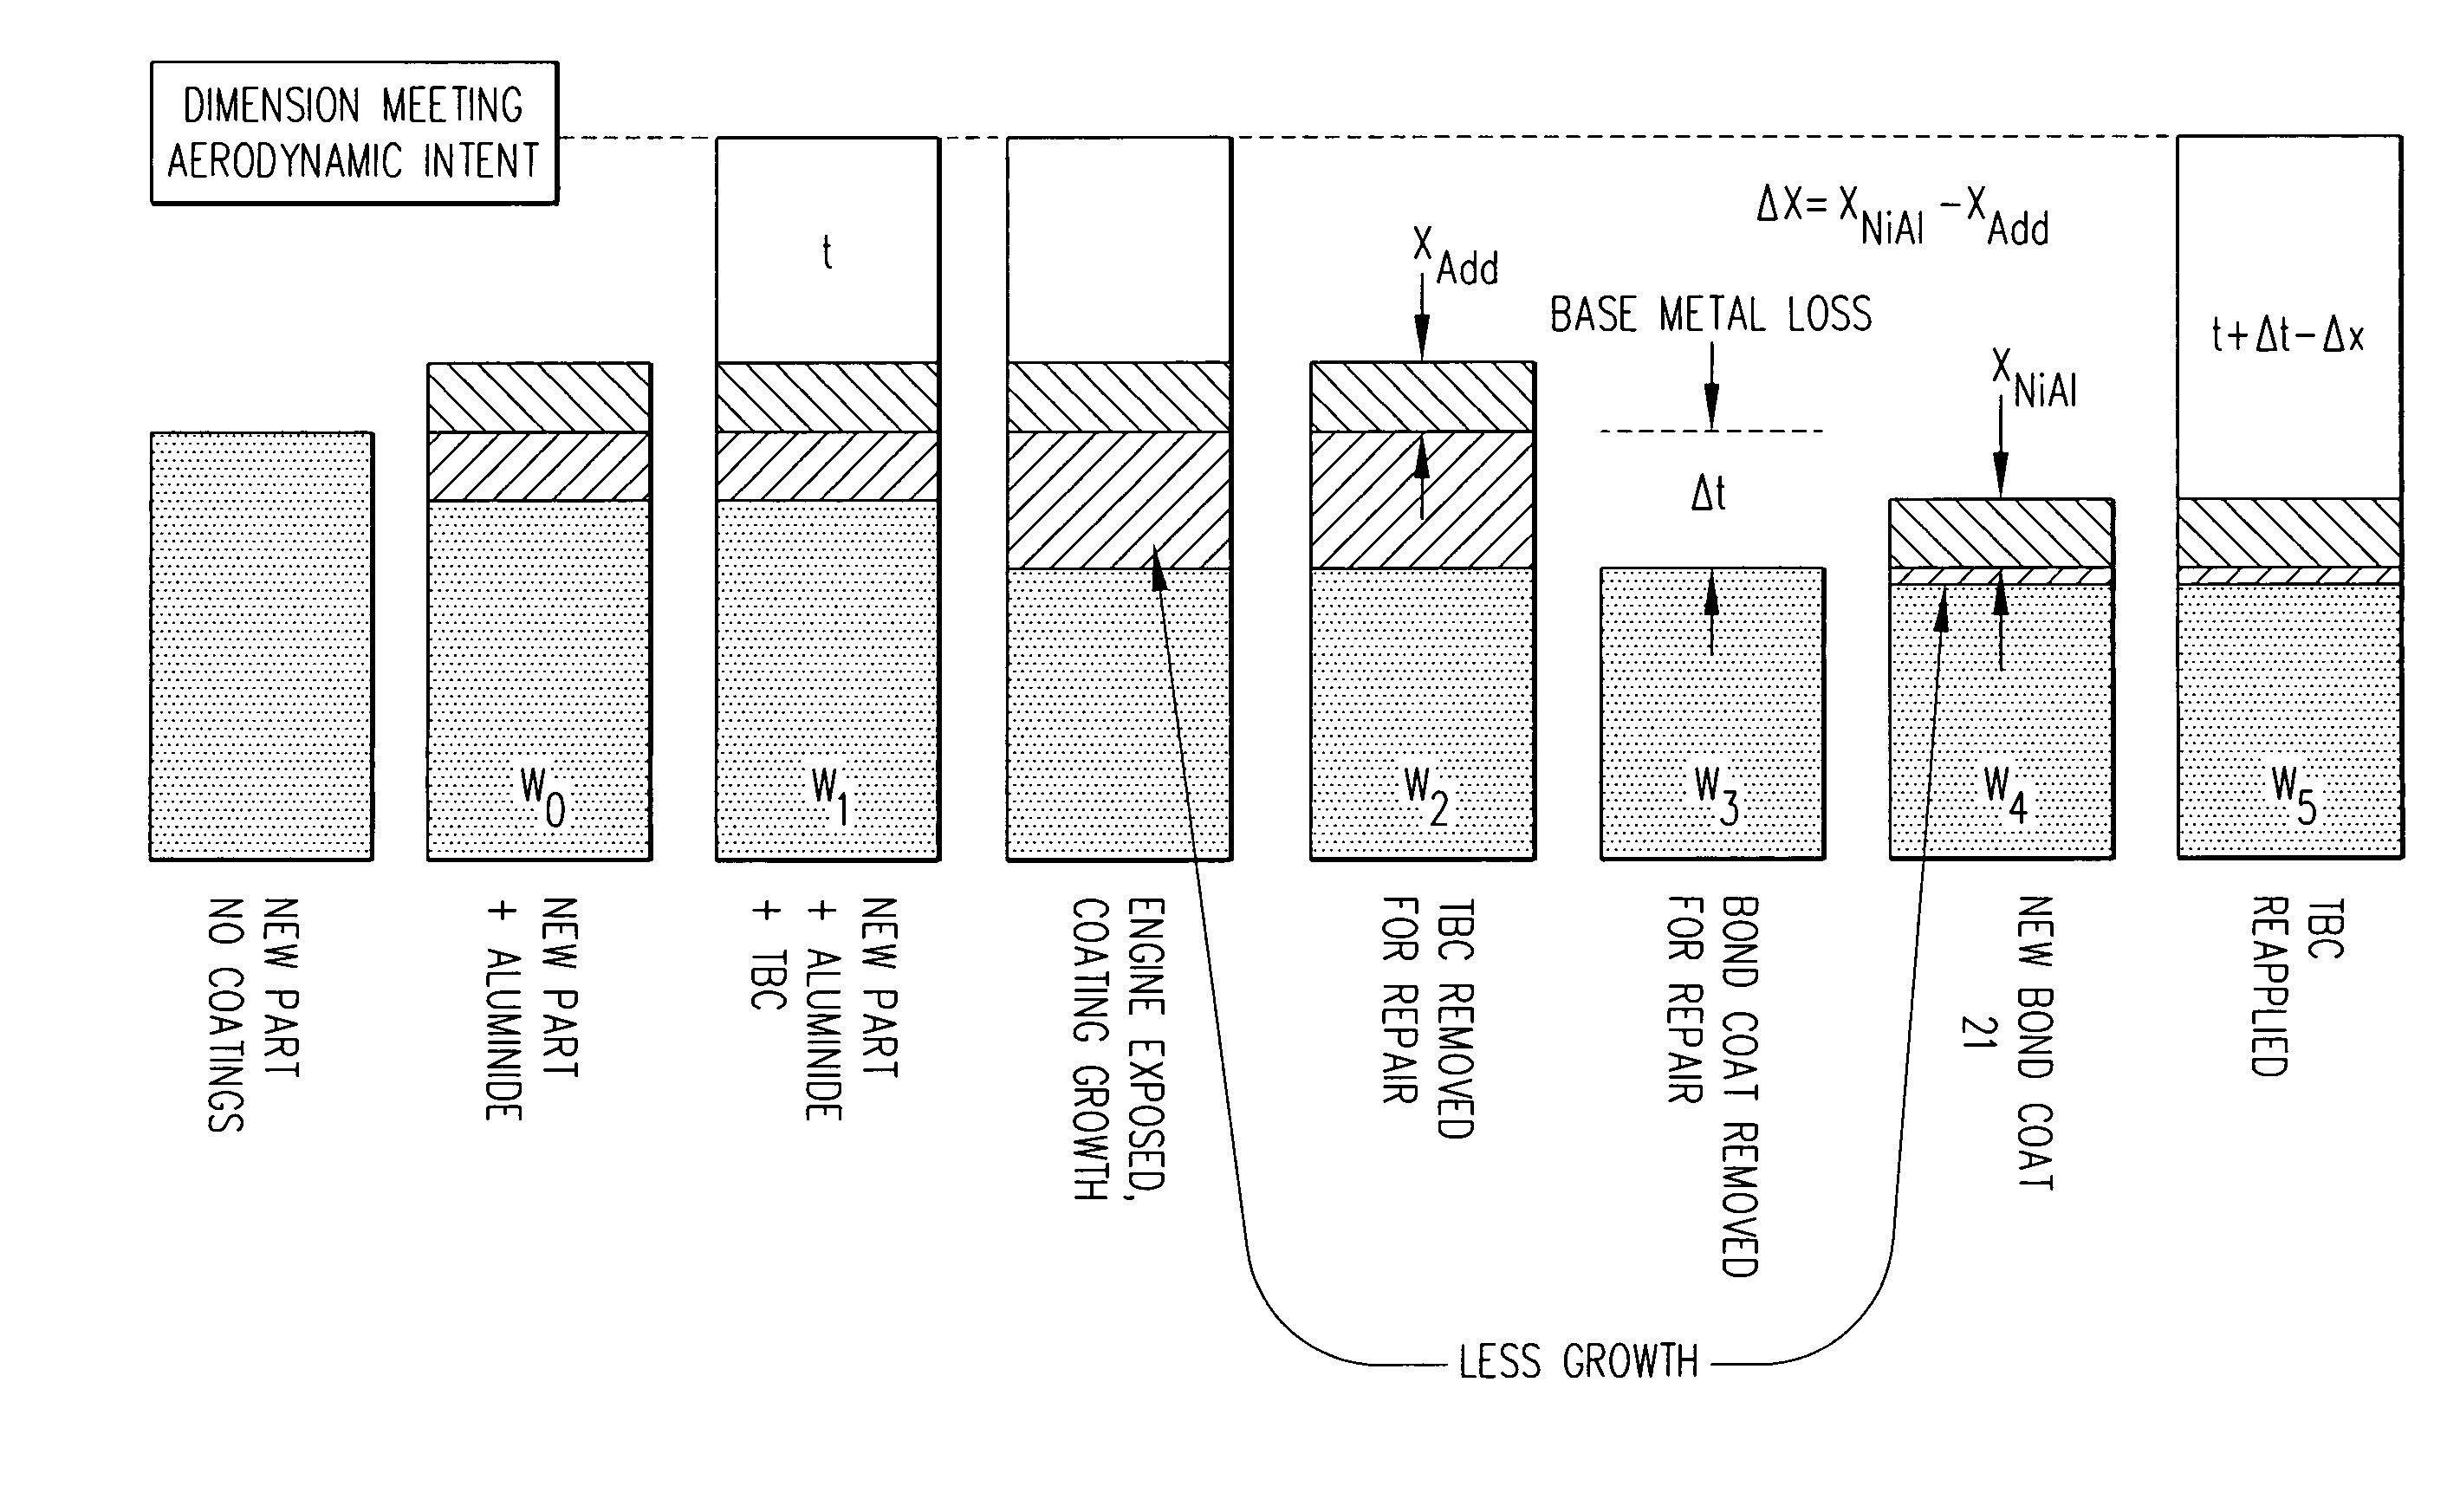 Method for repairing coated components using NiAl bond coats